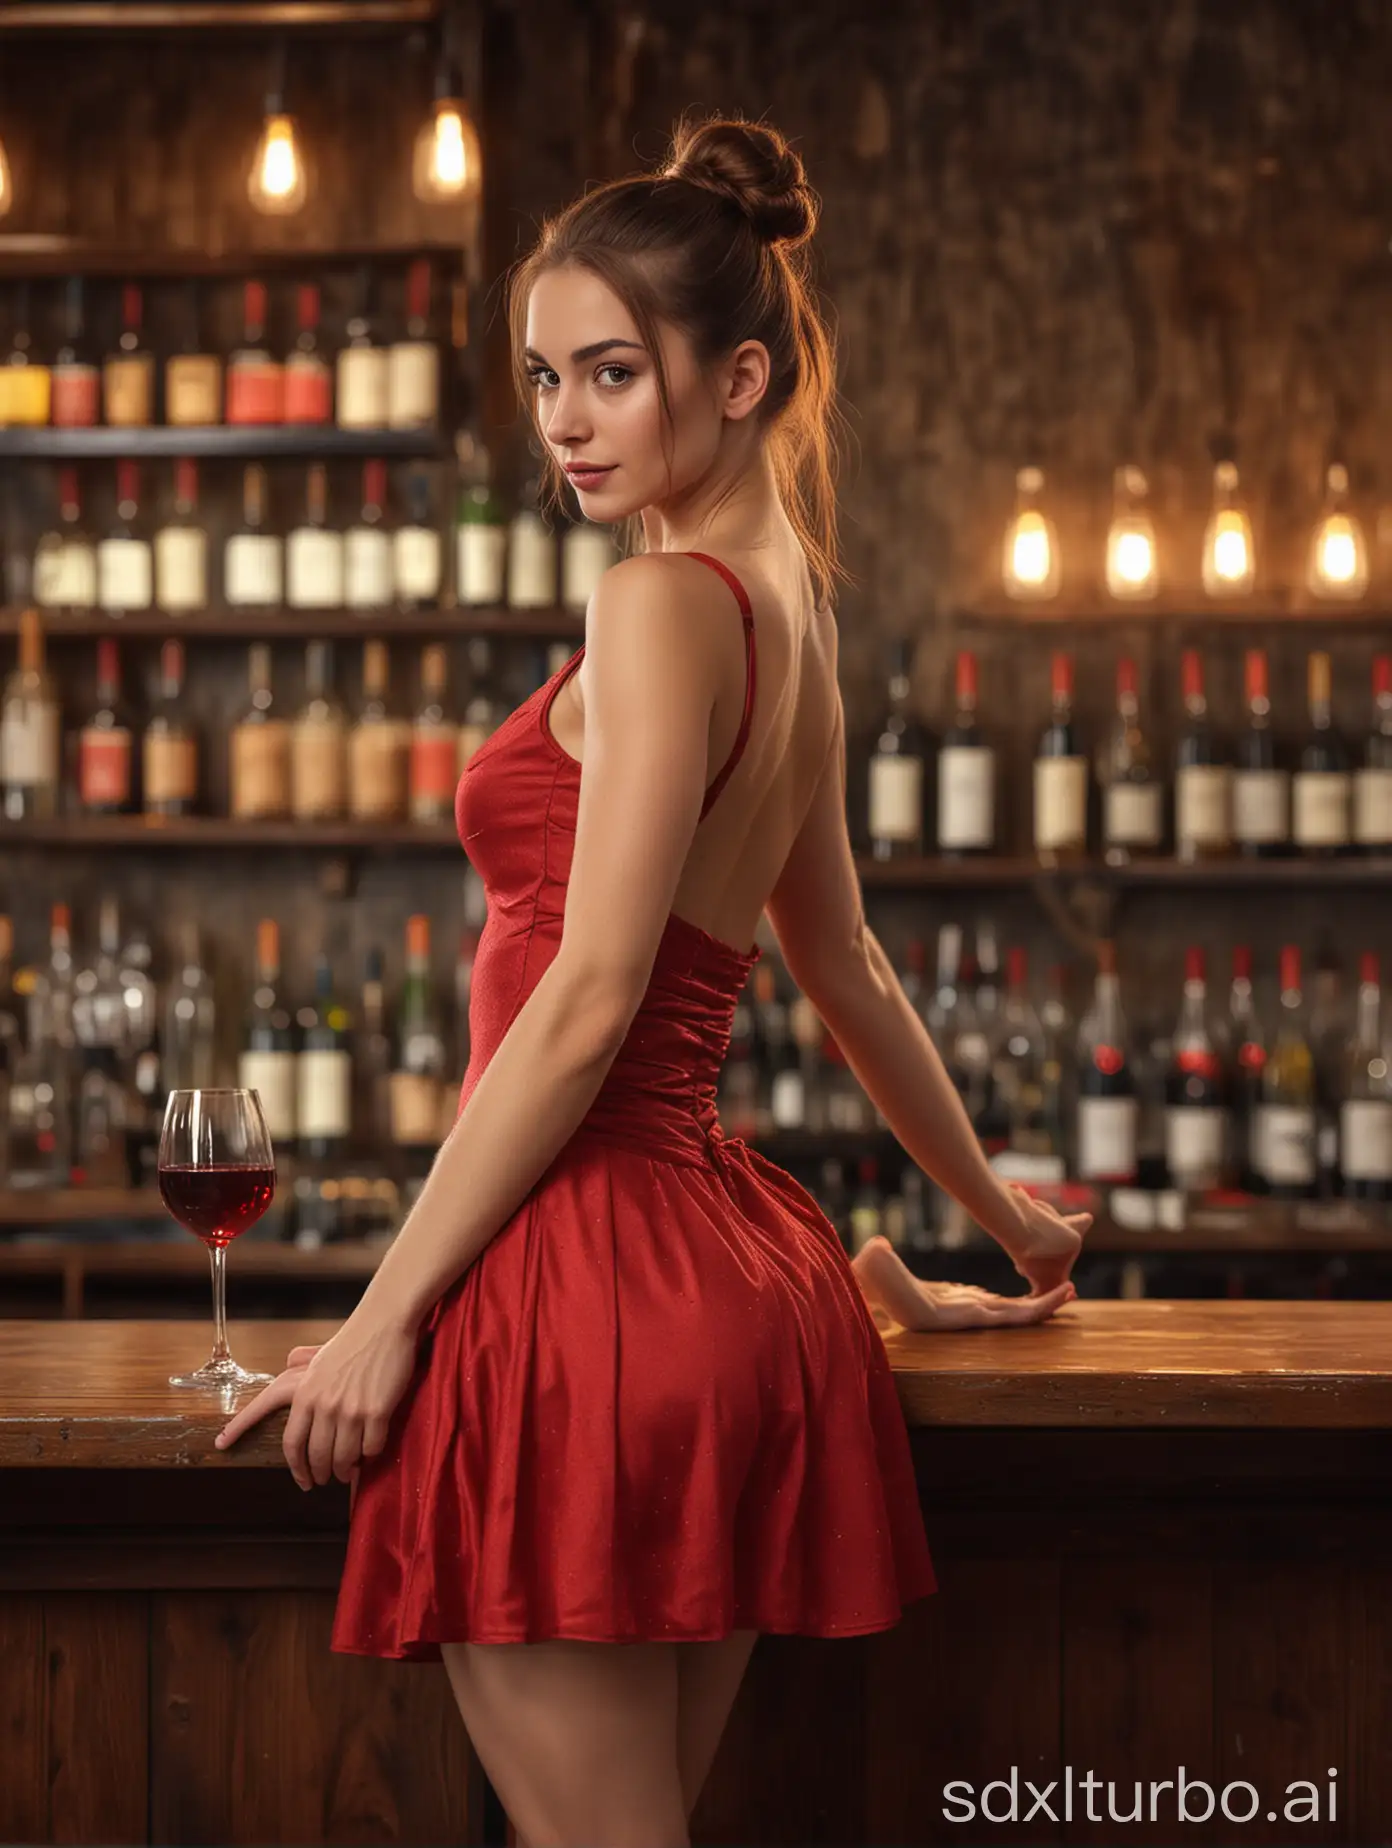 young Caucasian woman, long brown hair tied up as ballerina bun, slim body, wearing red sexy sleeveless dress, in a bar, a glass of wine nearby, in the evening, background bokeh, realistic, front view